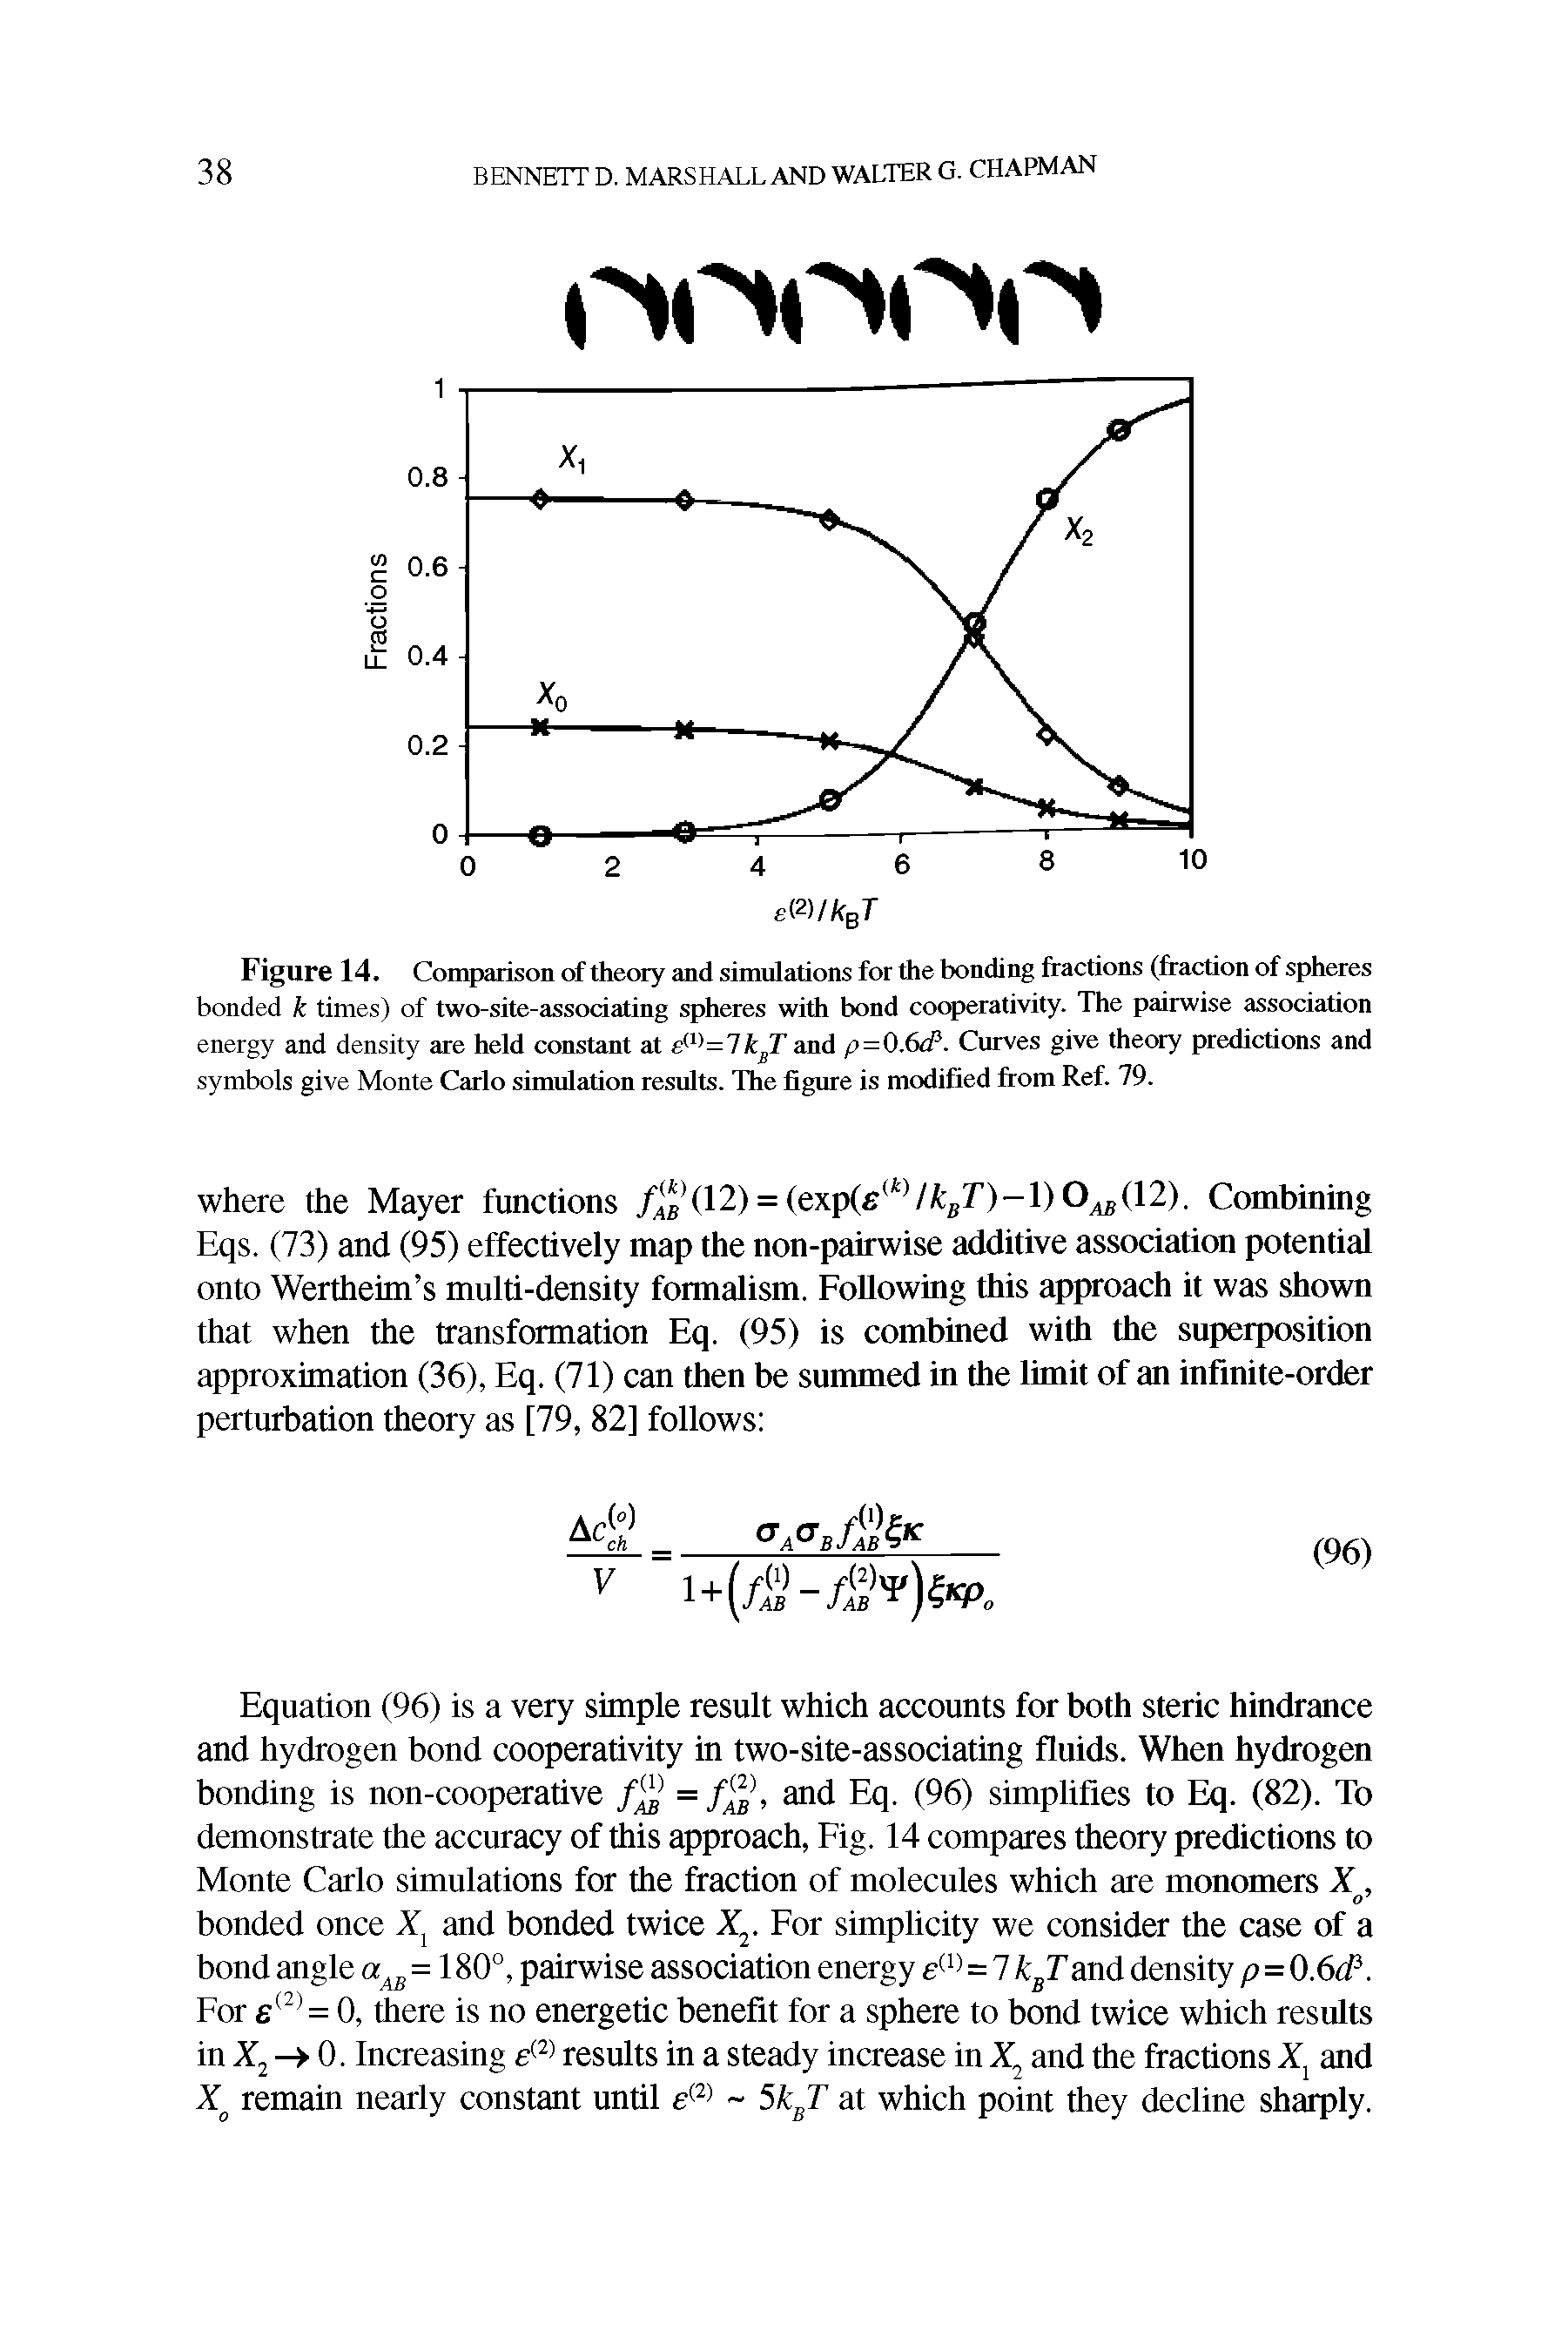 Figure 14. Comparison of theory and simulations for the bonding fractions (fraction of spheres bonded k times) of two-site-assodating spheres with bond cooperativity. The pairwise association energy and density are held constant at and p=0.6(P. Curves give thewy predictions and...